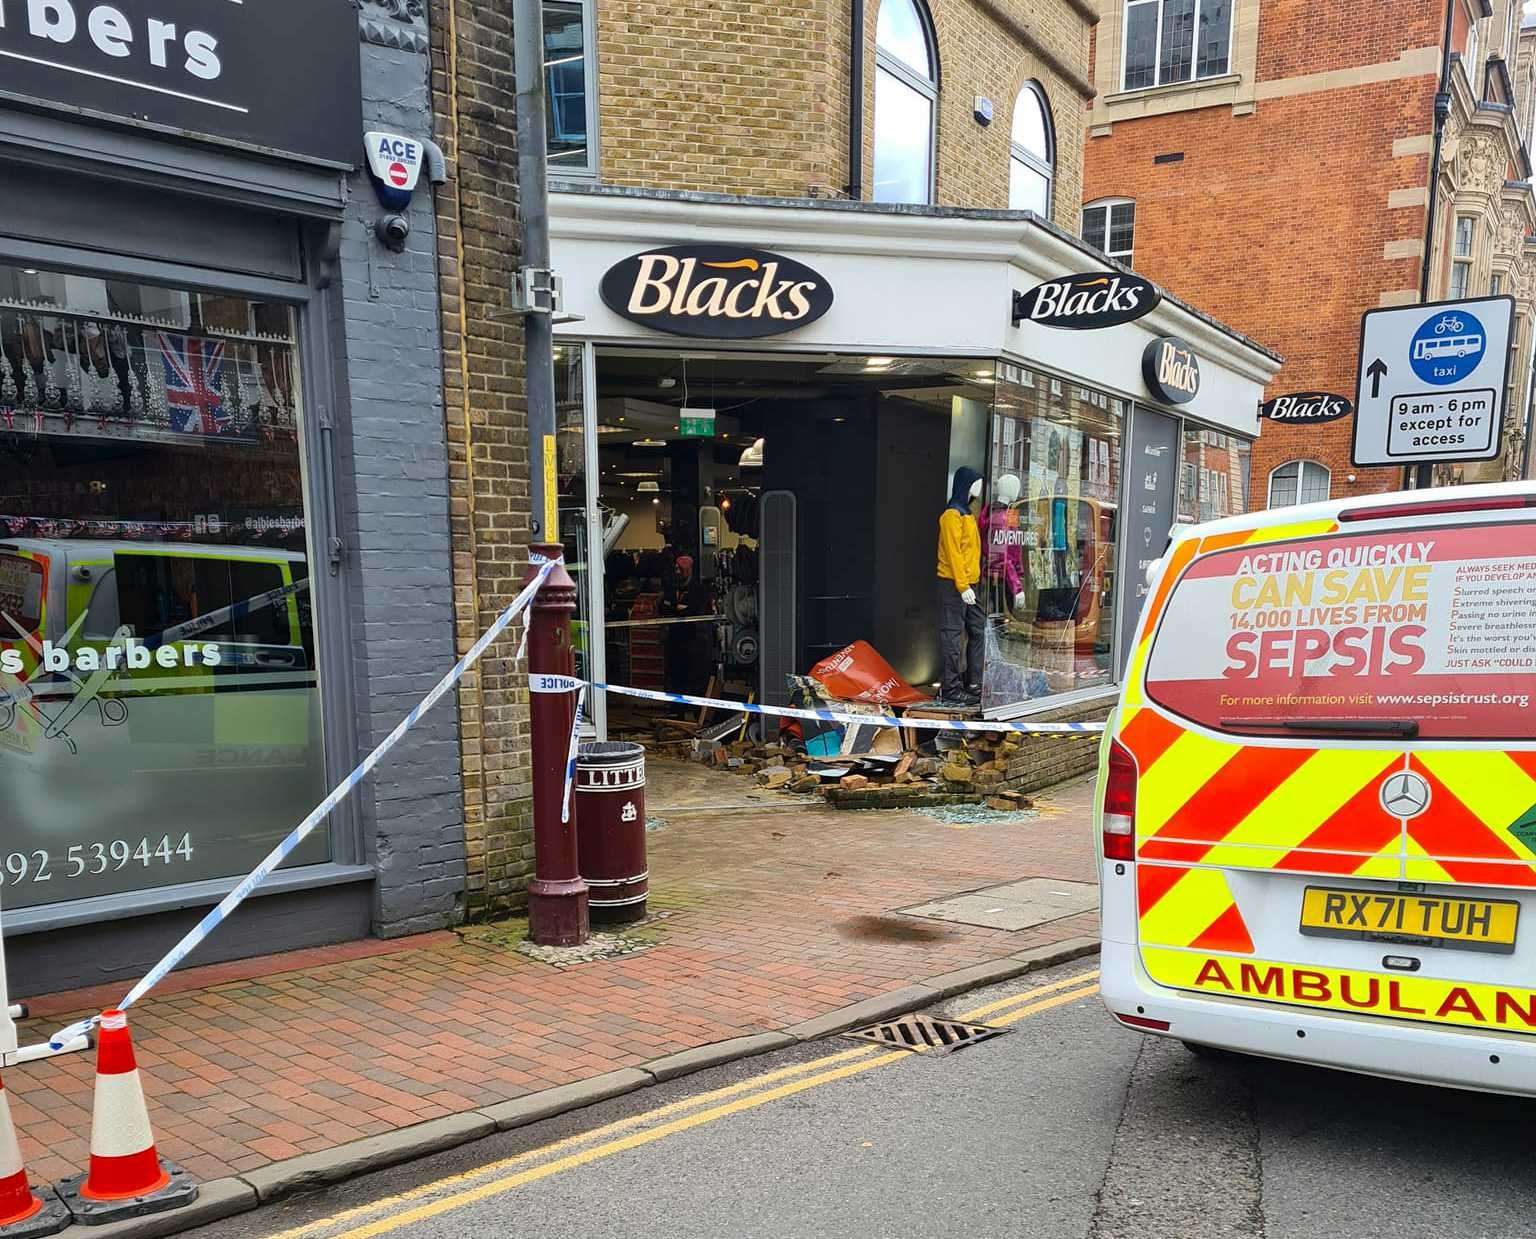 The scene after a car reversed into Black in Tunbridge Wells